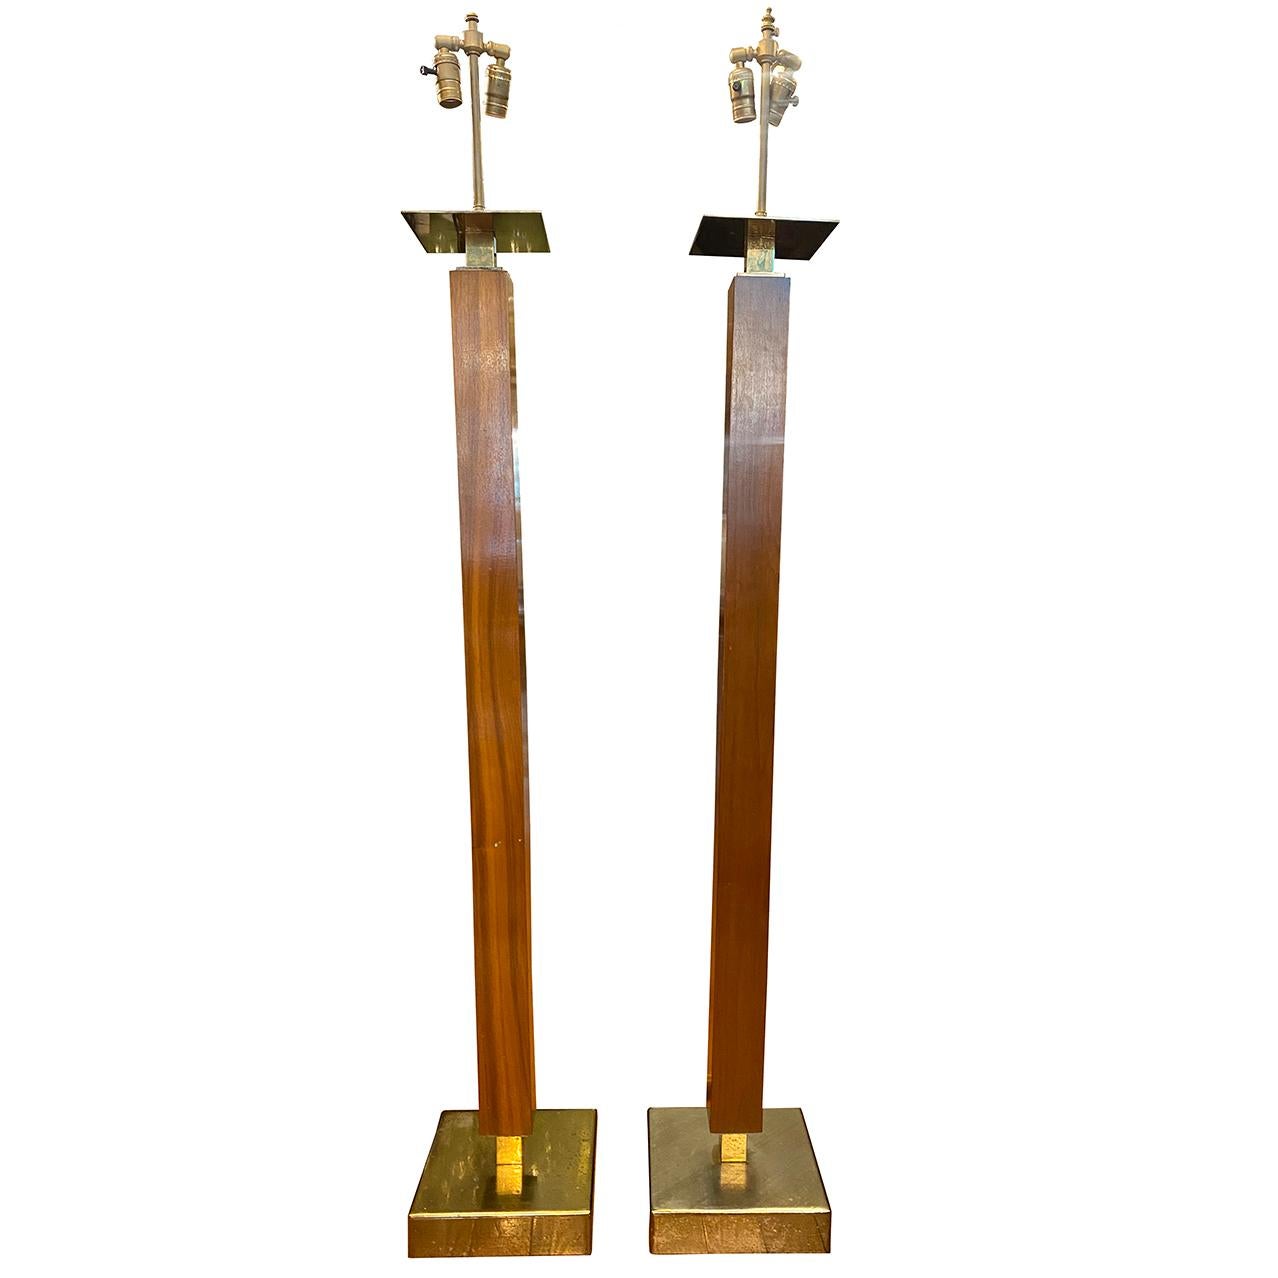 A pair of circa 1950's American mid-century wooden floor lamps with brass bases and square column bodies.

Measurements:
Height of body: 55.5